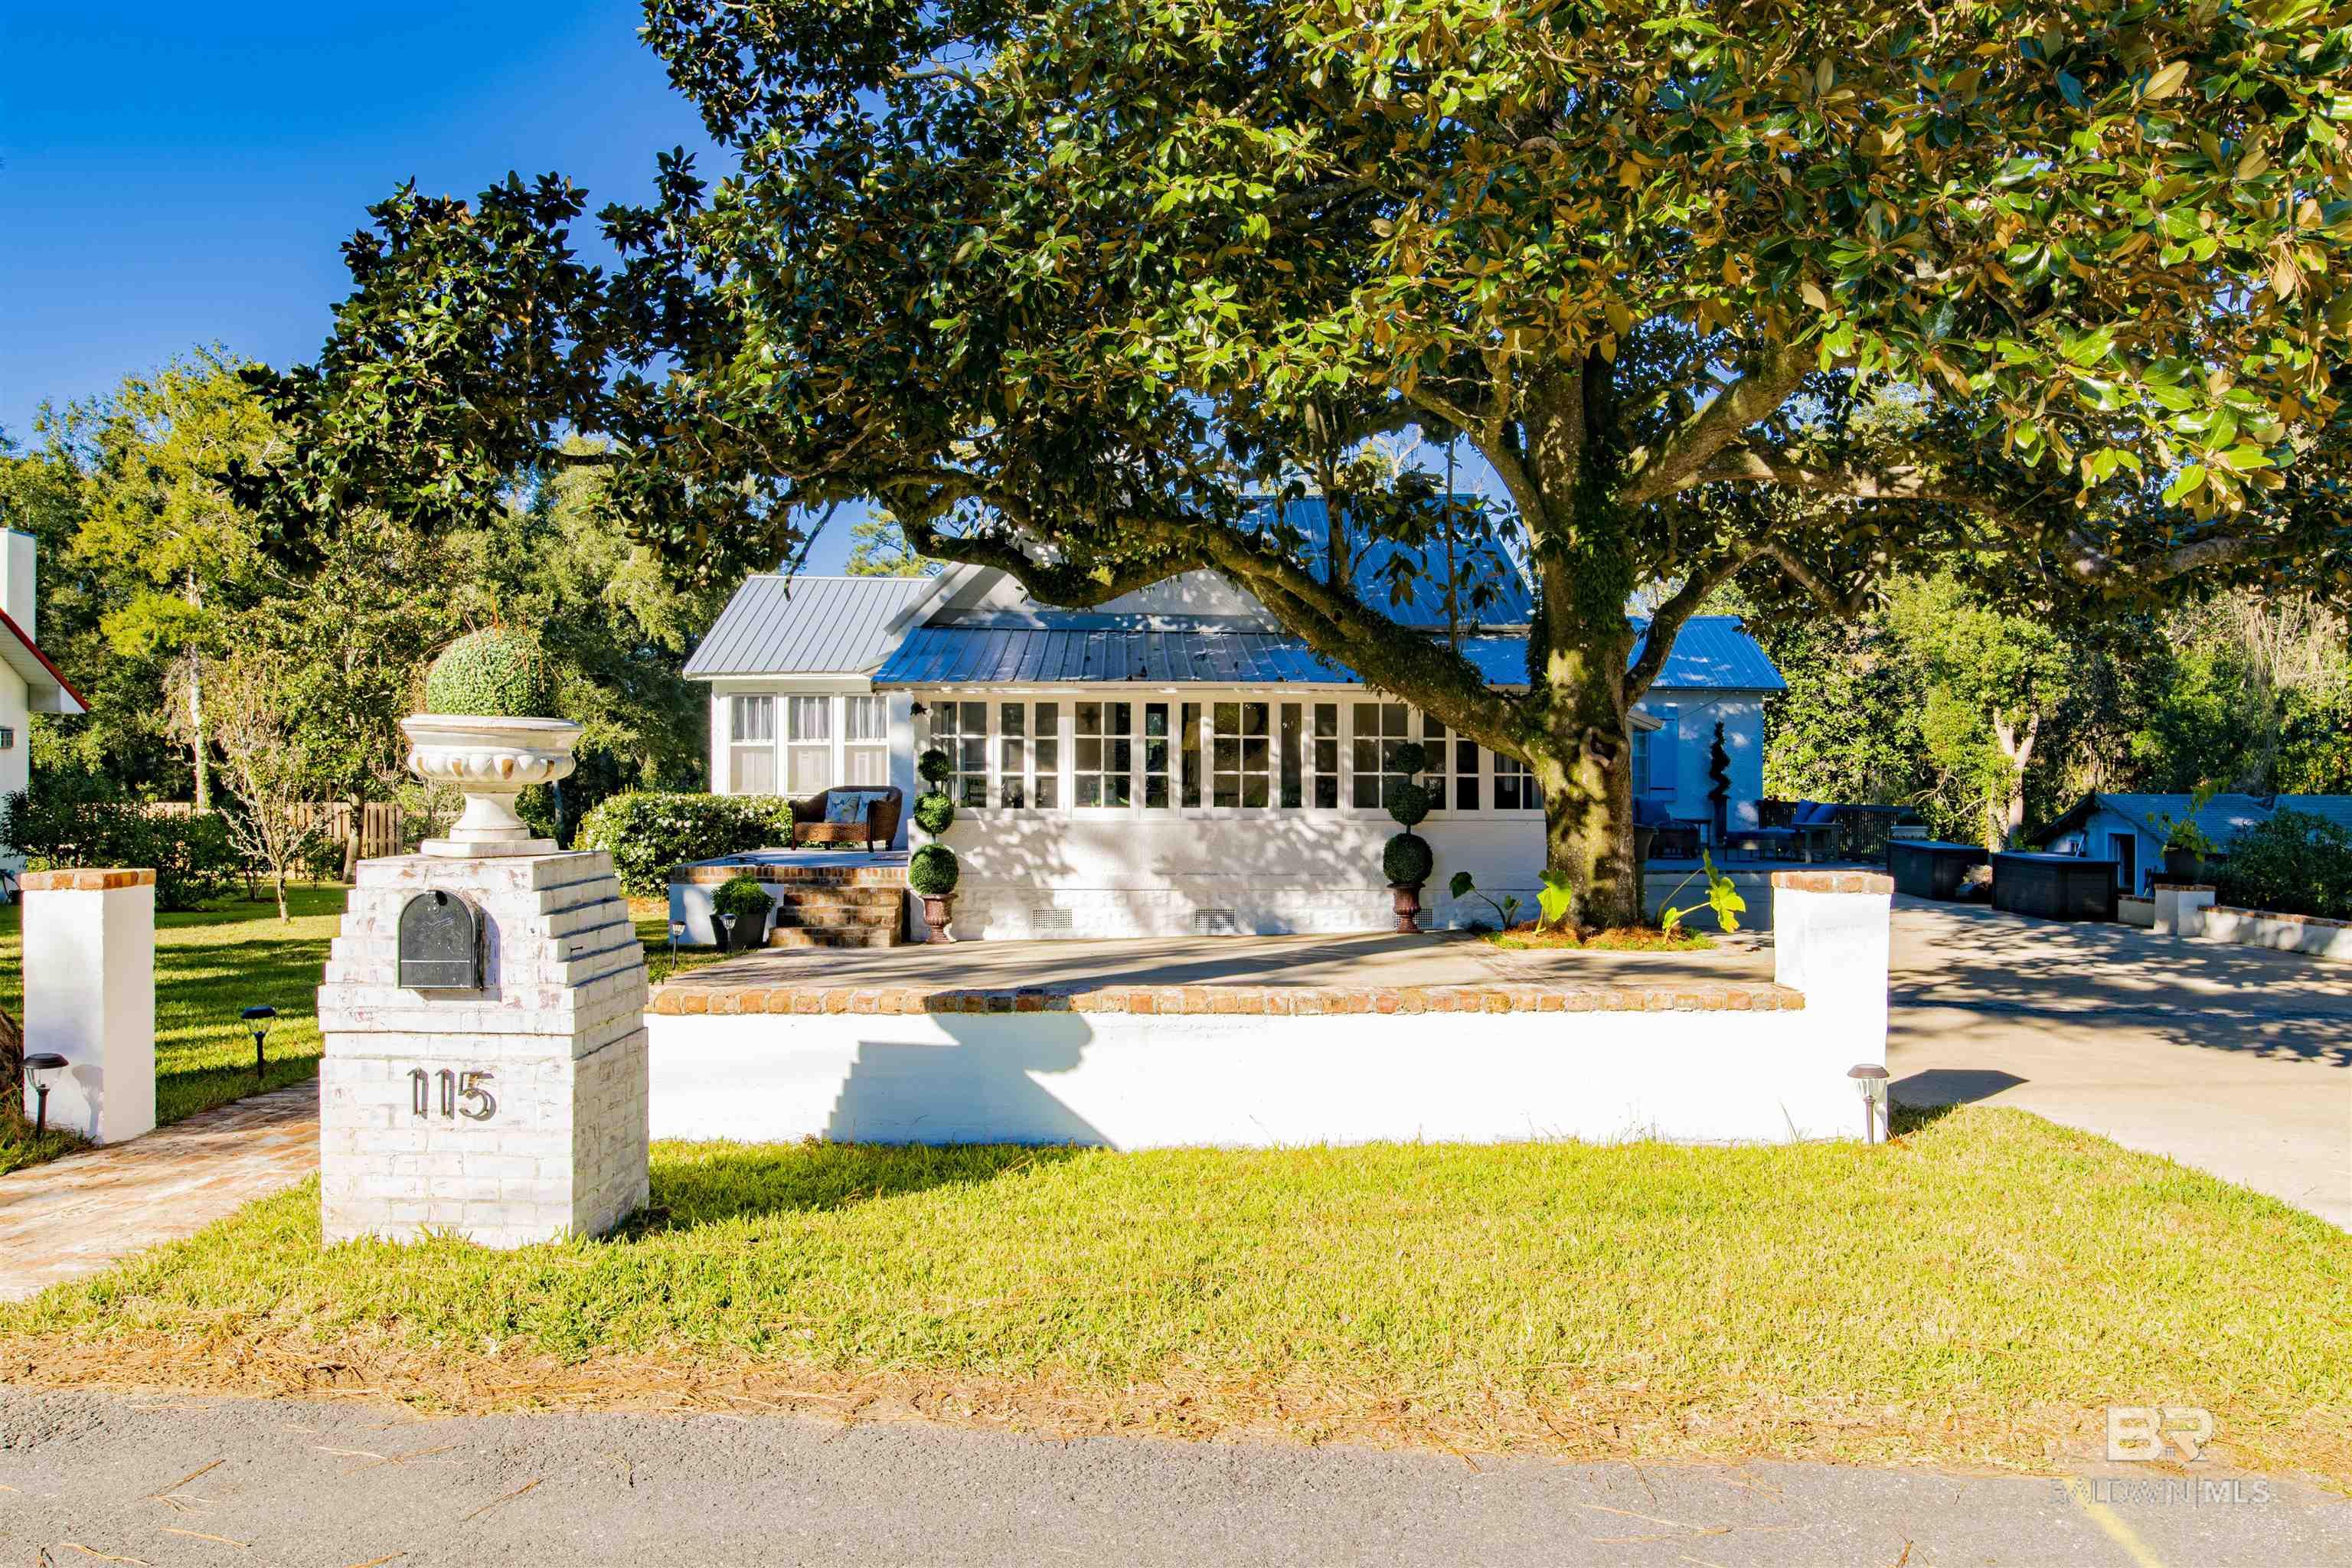 Welcome to 115 North Avenue, Fairhope. Come experience the lifestyle of living in Fairhope's MOST desirable Bluff Neighborhood. Less than 1,000 feet from MOBILE BAY!!! Enjoy peaceful walks from your front porch to the Fairhope Beach Park, Pier, and Mobile Bay or take a short walk into downtown Fairhope. This charming 1940's Bungalow features amazing views from the sunroom across the front of your home and is located on a 137' wide lot with ample storage, and an outside workshop. These wonderful cottages don't come along very often, especially as updated as this one and it's all about LOCATION, LOCATION, LOCATION! Open the door to this fabulous cottage and the first thing you notice is the original hardwood floors that sets the tone for a comfortable and inviting home. With 3 bedrooms and 3 baths with 1 bath done in 2020, you have plenty of room for the whole family and there's a great office space. Come sit in the roomy living area with fireplace that opens into your sunroom, completely enclosed with windows, not screened-in, and this space will definitely get a lot of use plus you have a side outdoor space off the sunroom. You must see this amazing kitchen which has new quartz countertops, new appliances, Travertine back splash, Travertine flooring in both kitchen and the dining area with a beautiful chandelier and high ceiling. Home renovations include new ceilings in both the kitchen and bedrooms, shower being added in one of the bathrooms, with NEW Tin Roof in 2019, new Rheem A/C in 2019, new Rheem water heater in 2017, some lighting and ceiling fans have been upgraded, freshly painted, and there is an amazing new deck to enjoy your wonderful outdoor space. The driveway will hold up to 6 cars, yard was newly sodded, brick mailbox was added, new back porch, Owner is currently replacing 2 windowpanes in living room, the average electric & gas is approx. $250/month including trash, water & sewer, and this home as current termite contact.